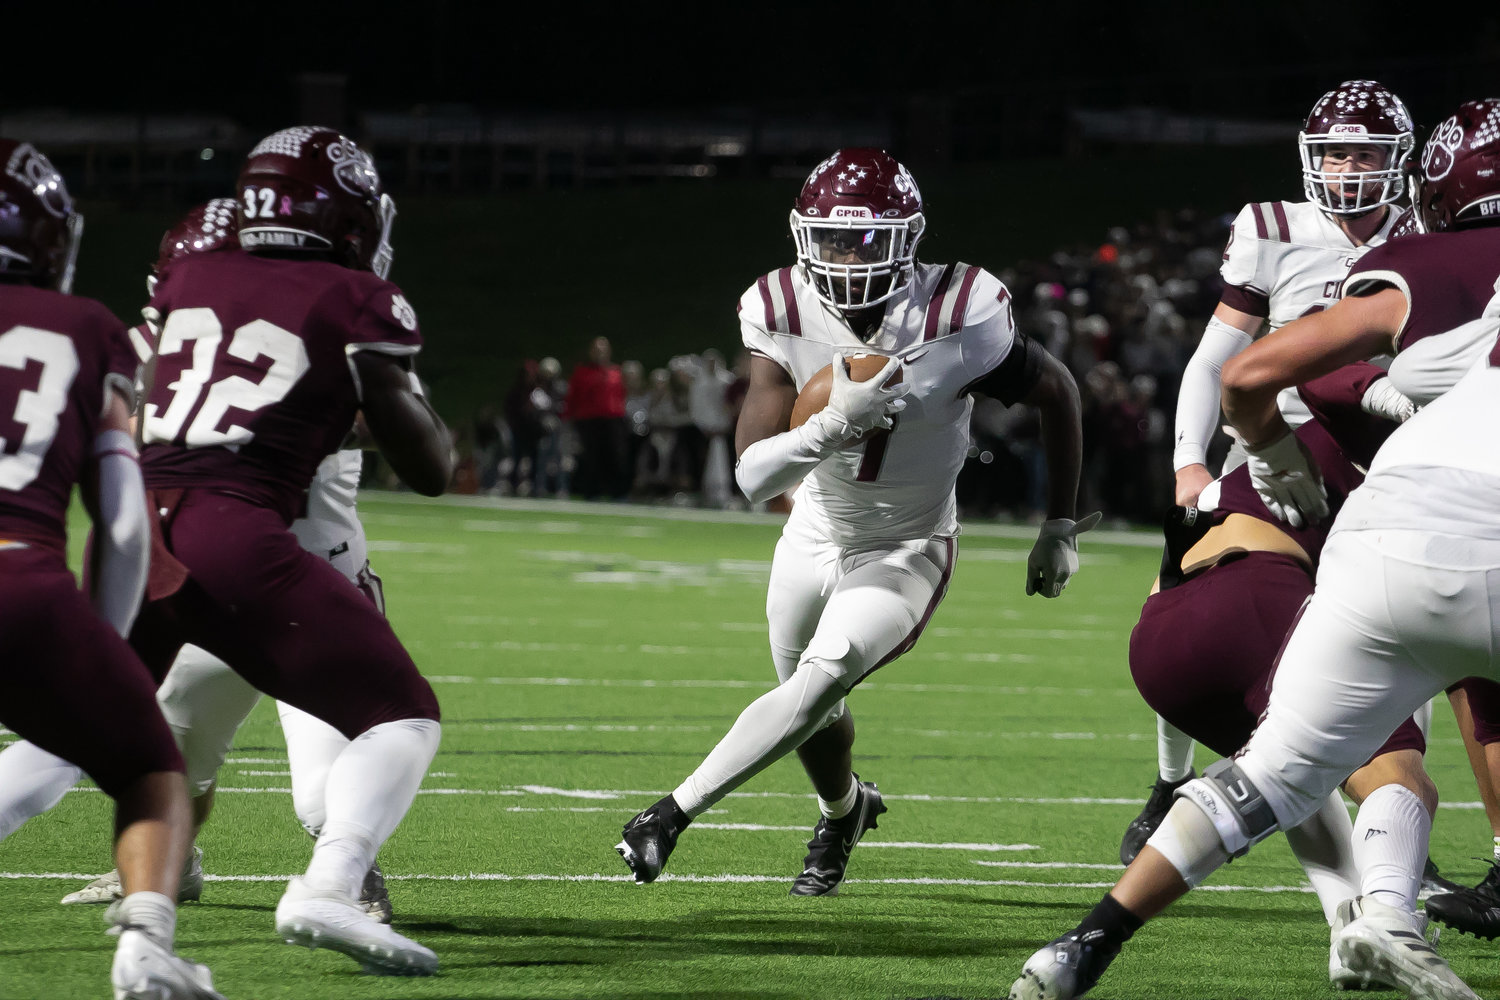 Sam McKnight tries to find a hole to run through during Friday's Class 6A-Division I area round game between Cinco Ranch and Cy-Fair at Pridgeon Stadium.